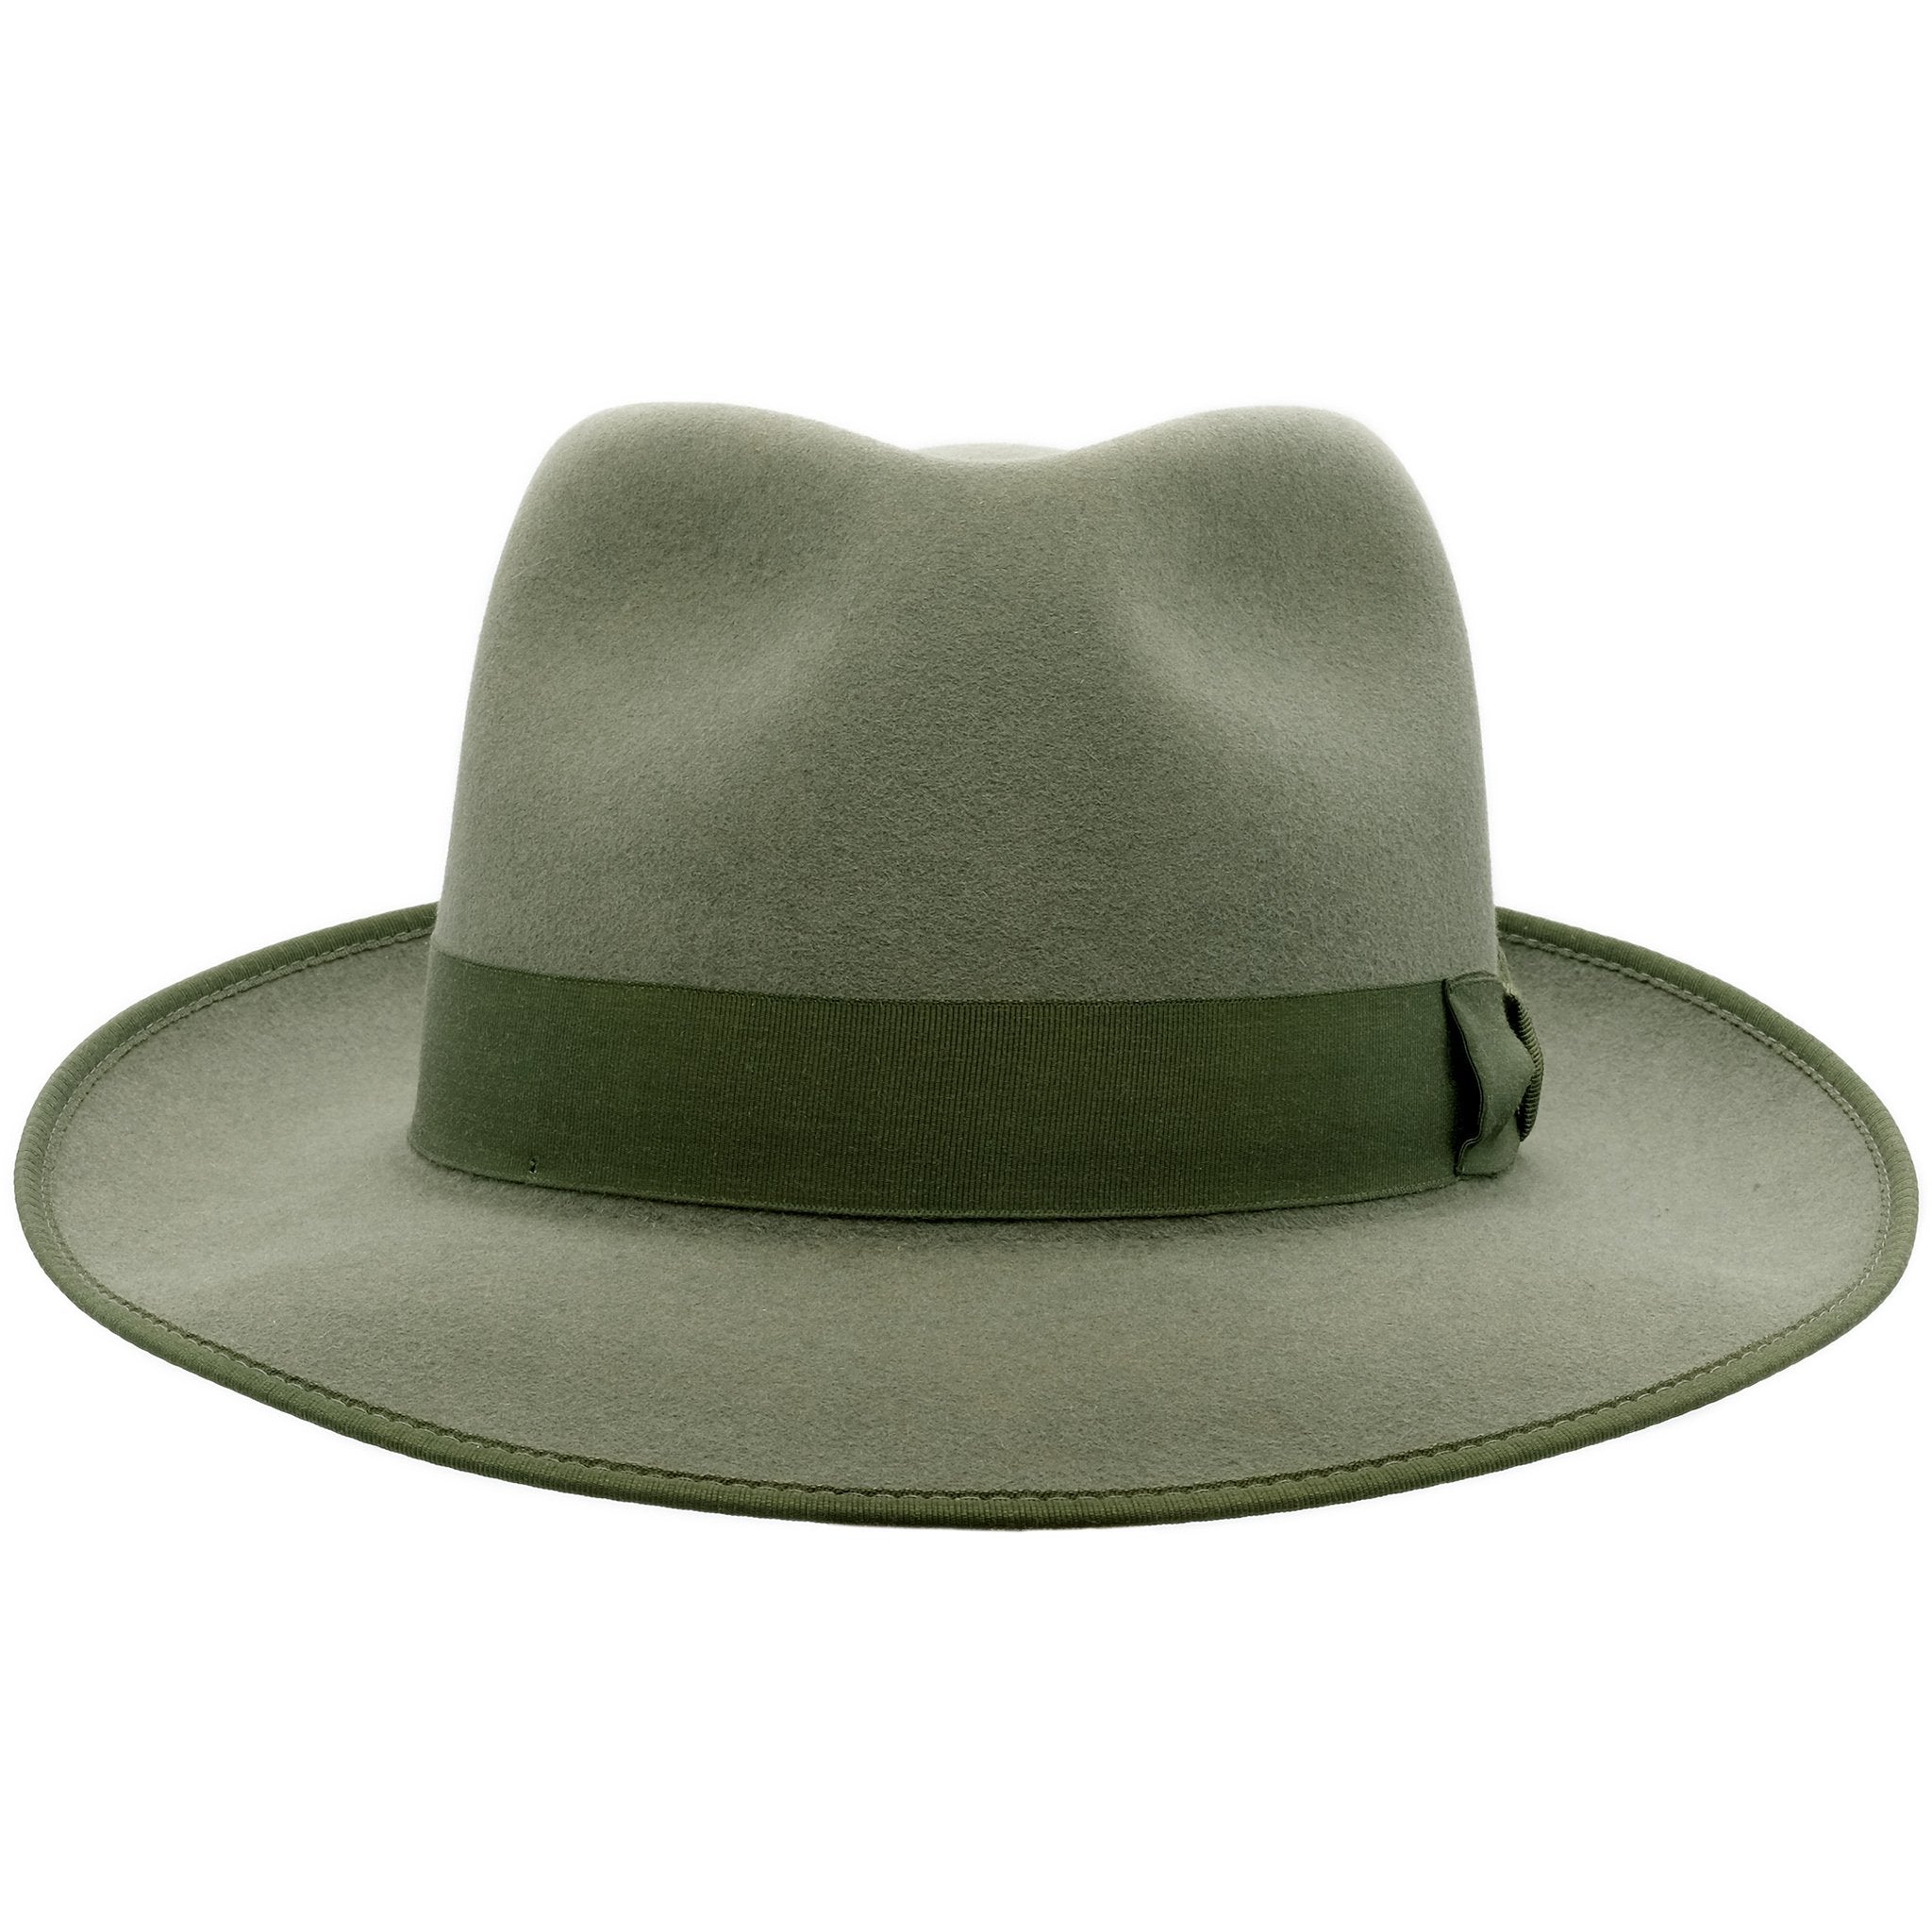 Front view of Akubra Stylemaster hat in Bluegrass Green colour